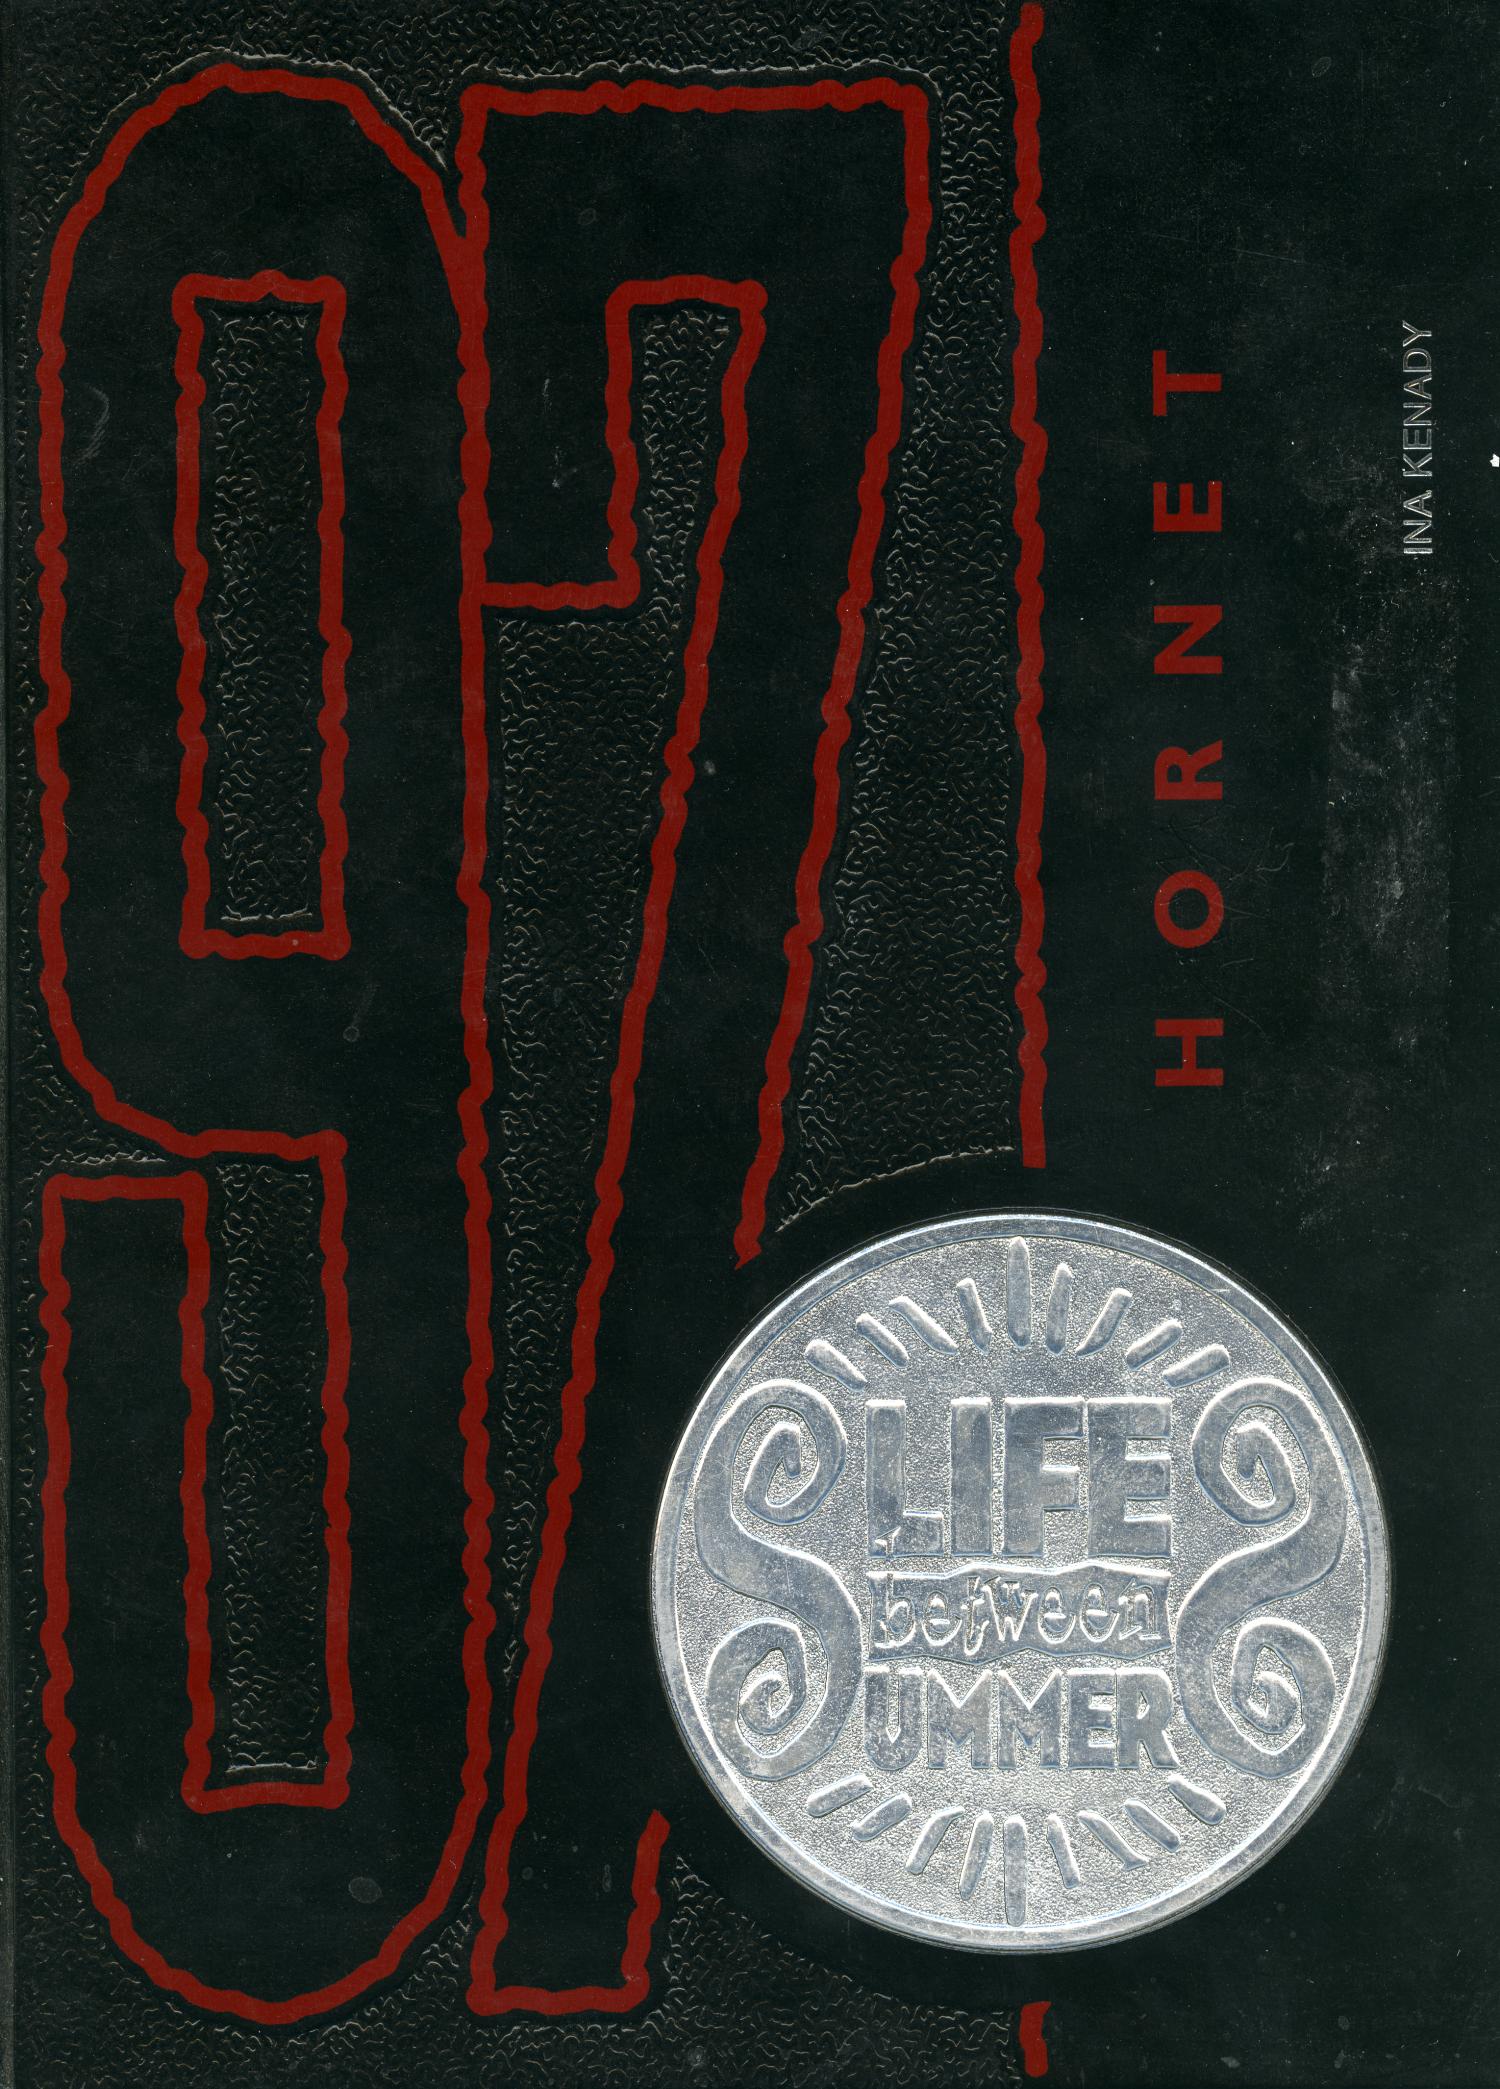 The Hornet, Yearbook of Aspermont Students, 1997
                                                
                                                    Front Cover
                                                